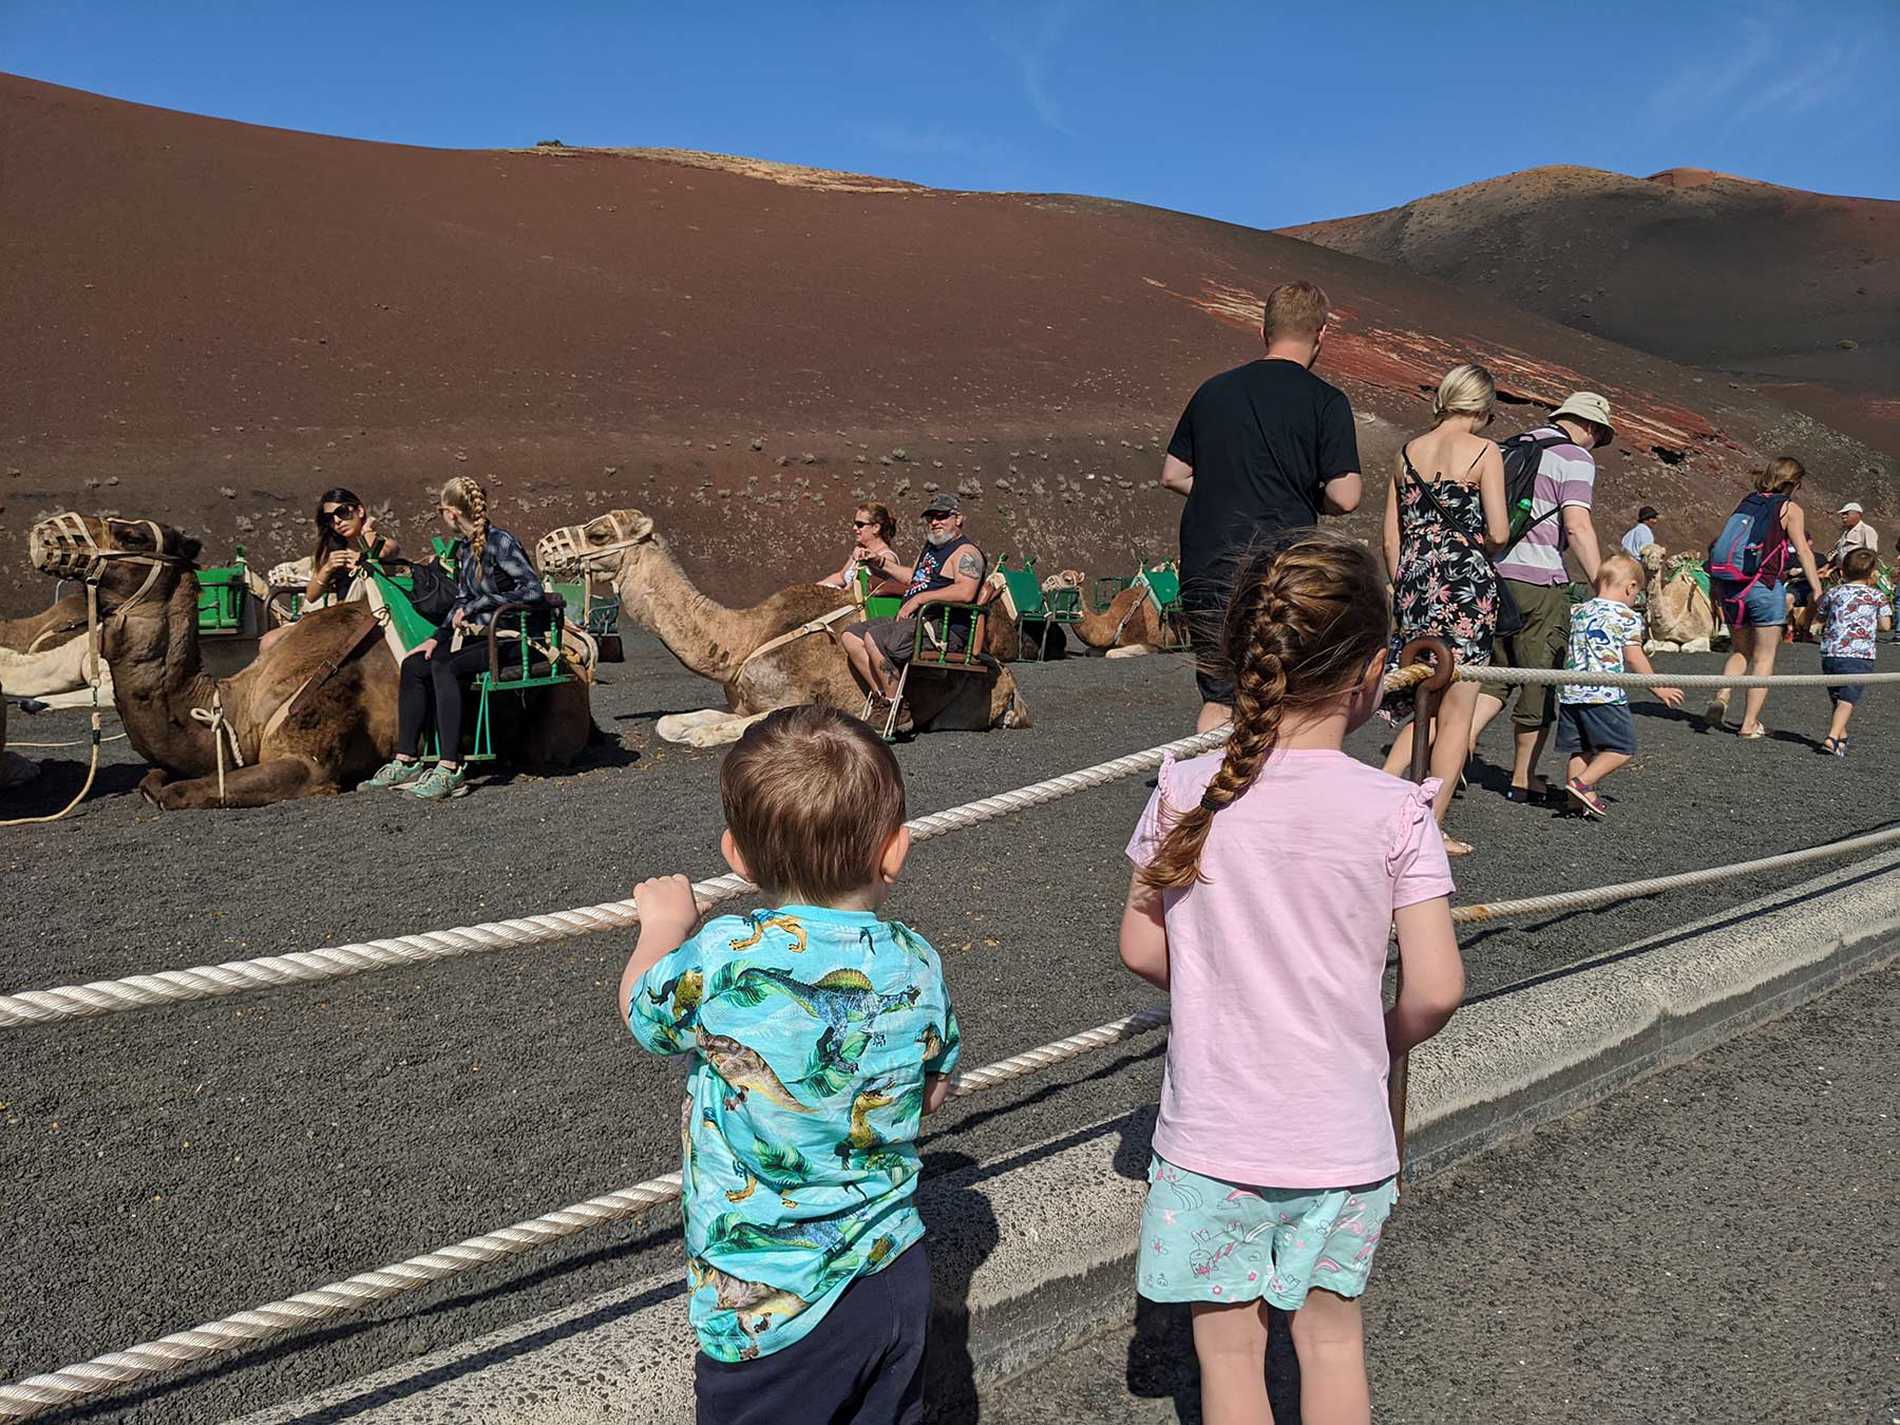 Hope and her brother looking at a row of camels that are sitting waiting to take holidaymakers on rides.